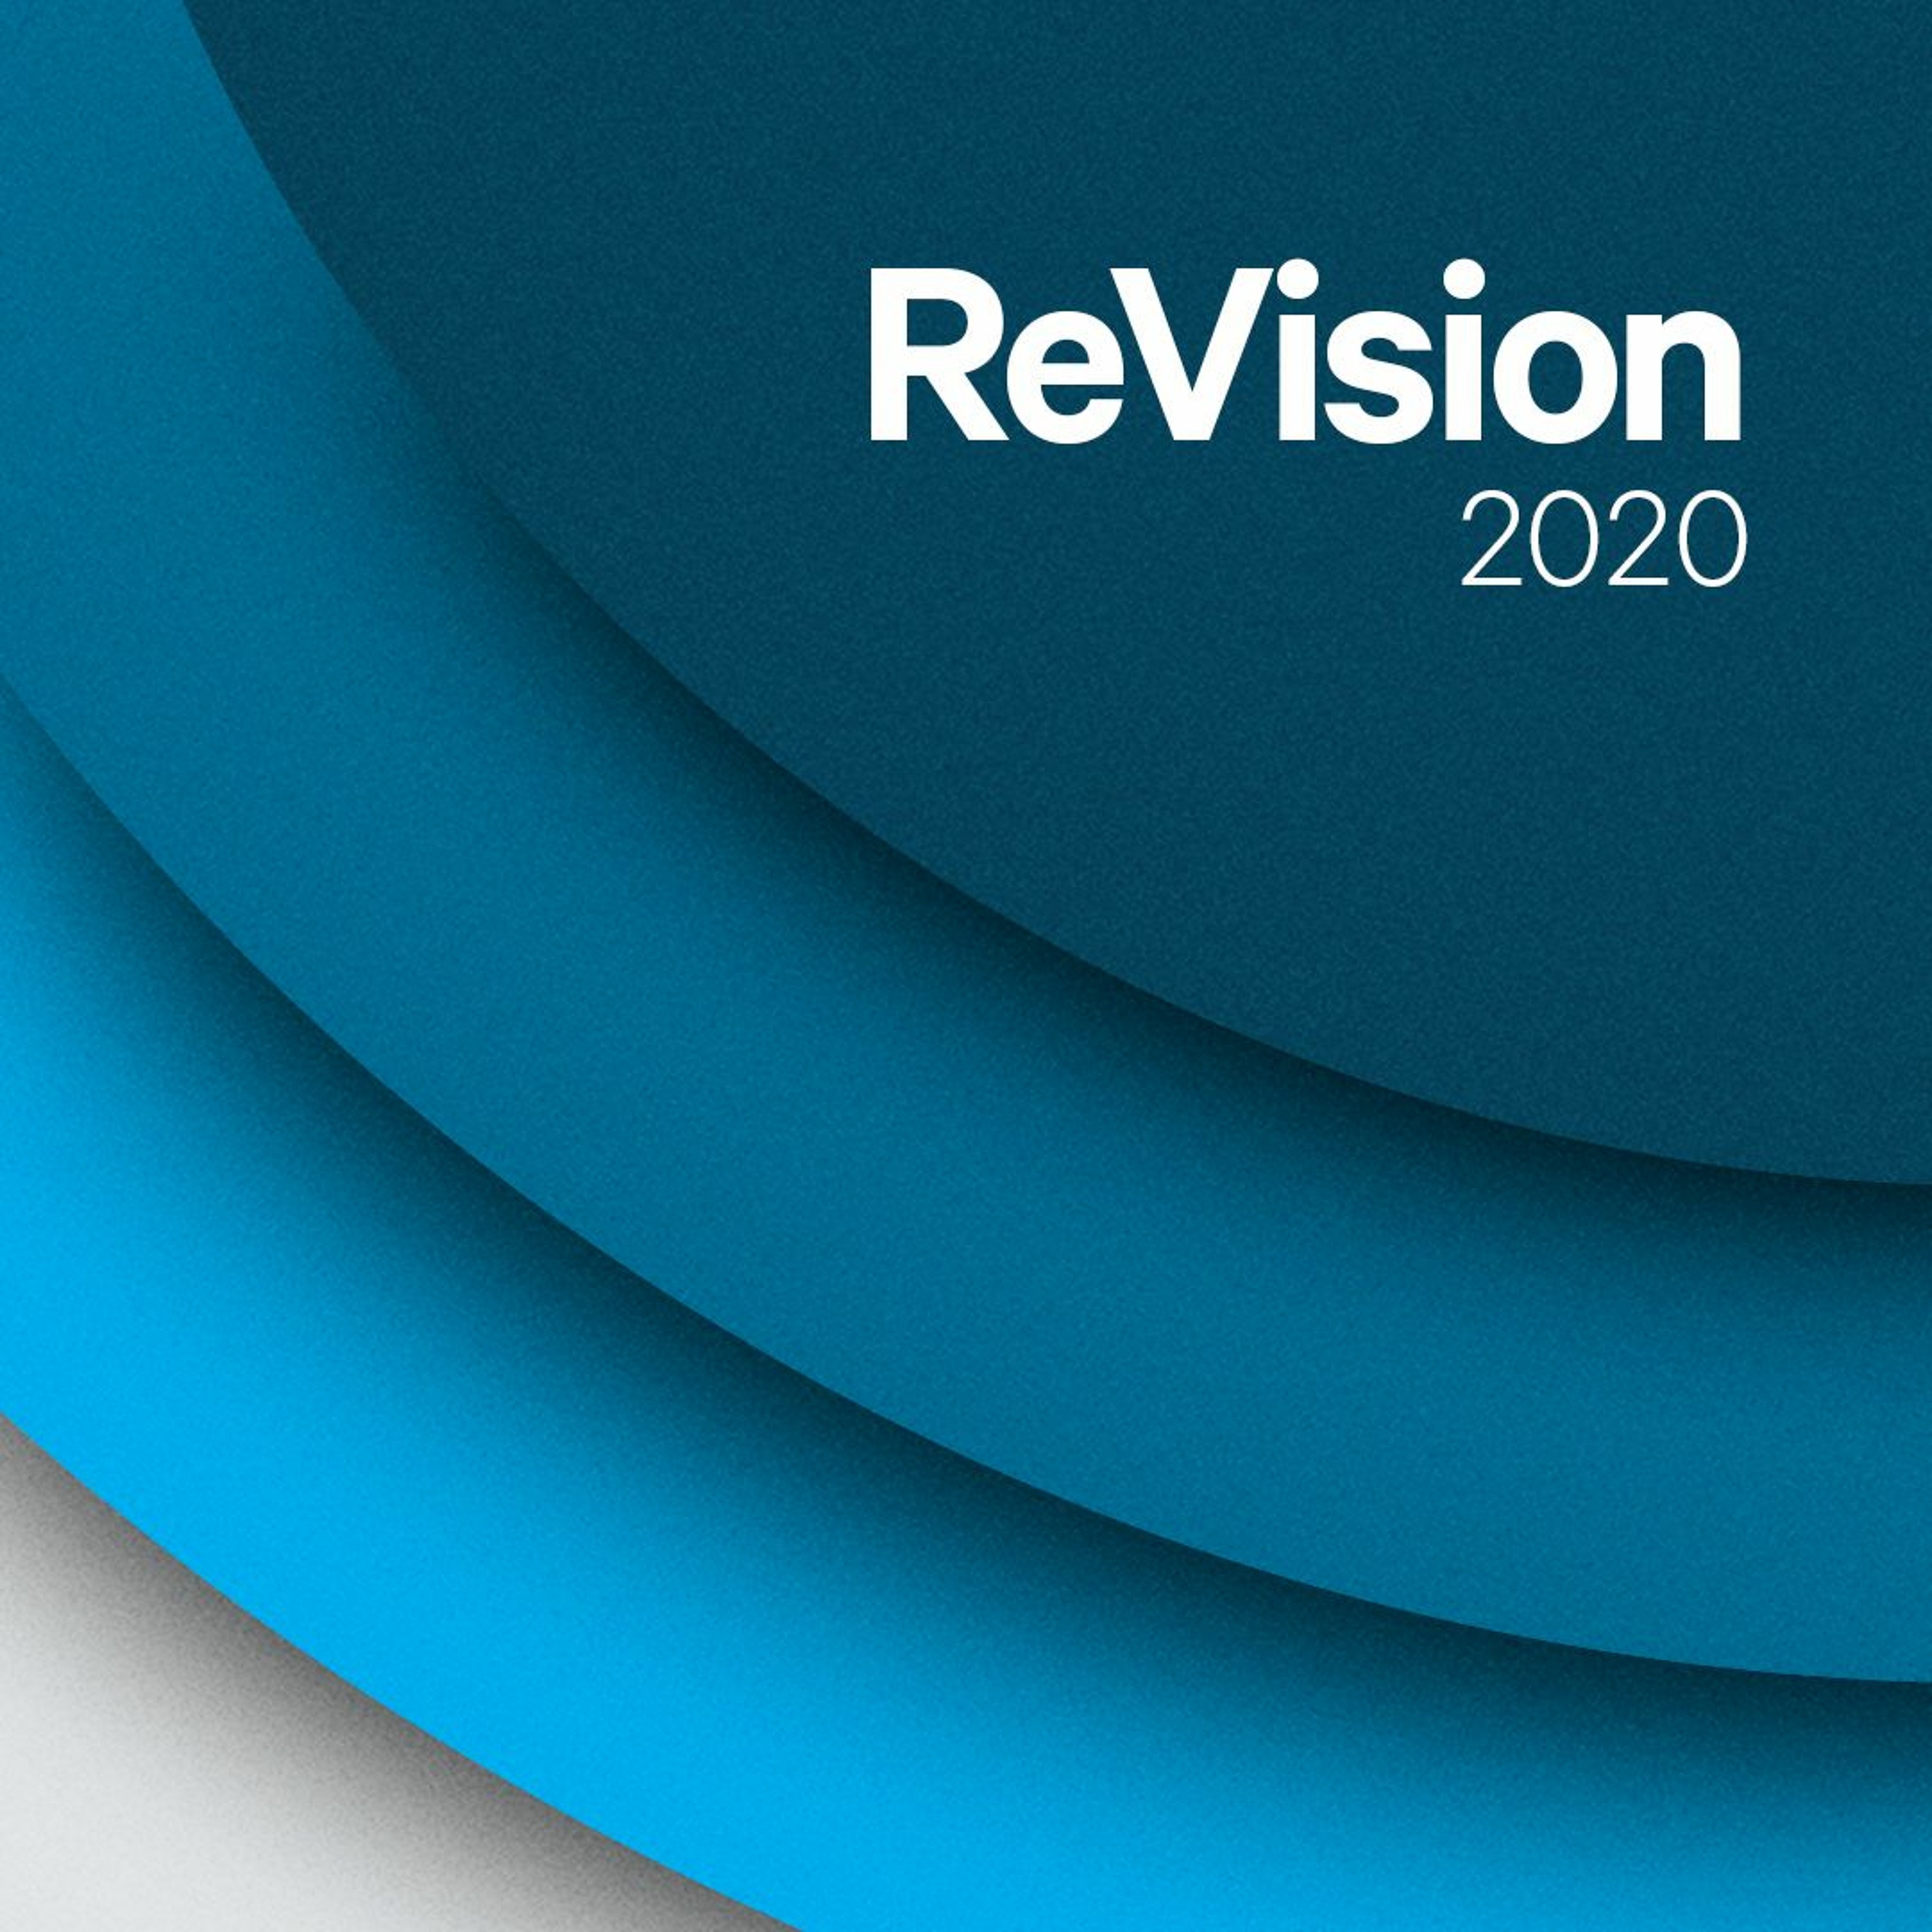 ReVision 2020 - Rick Atchley (02 February 2020)